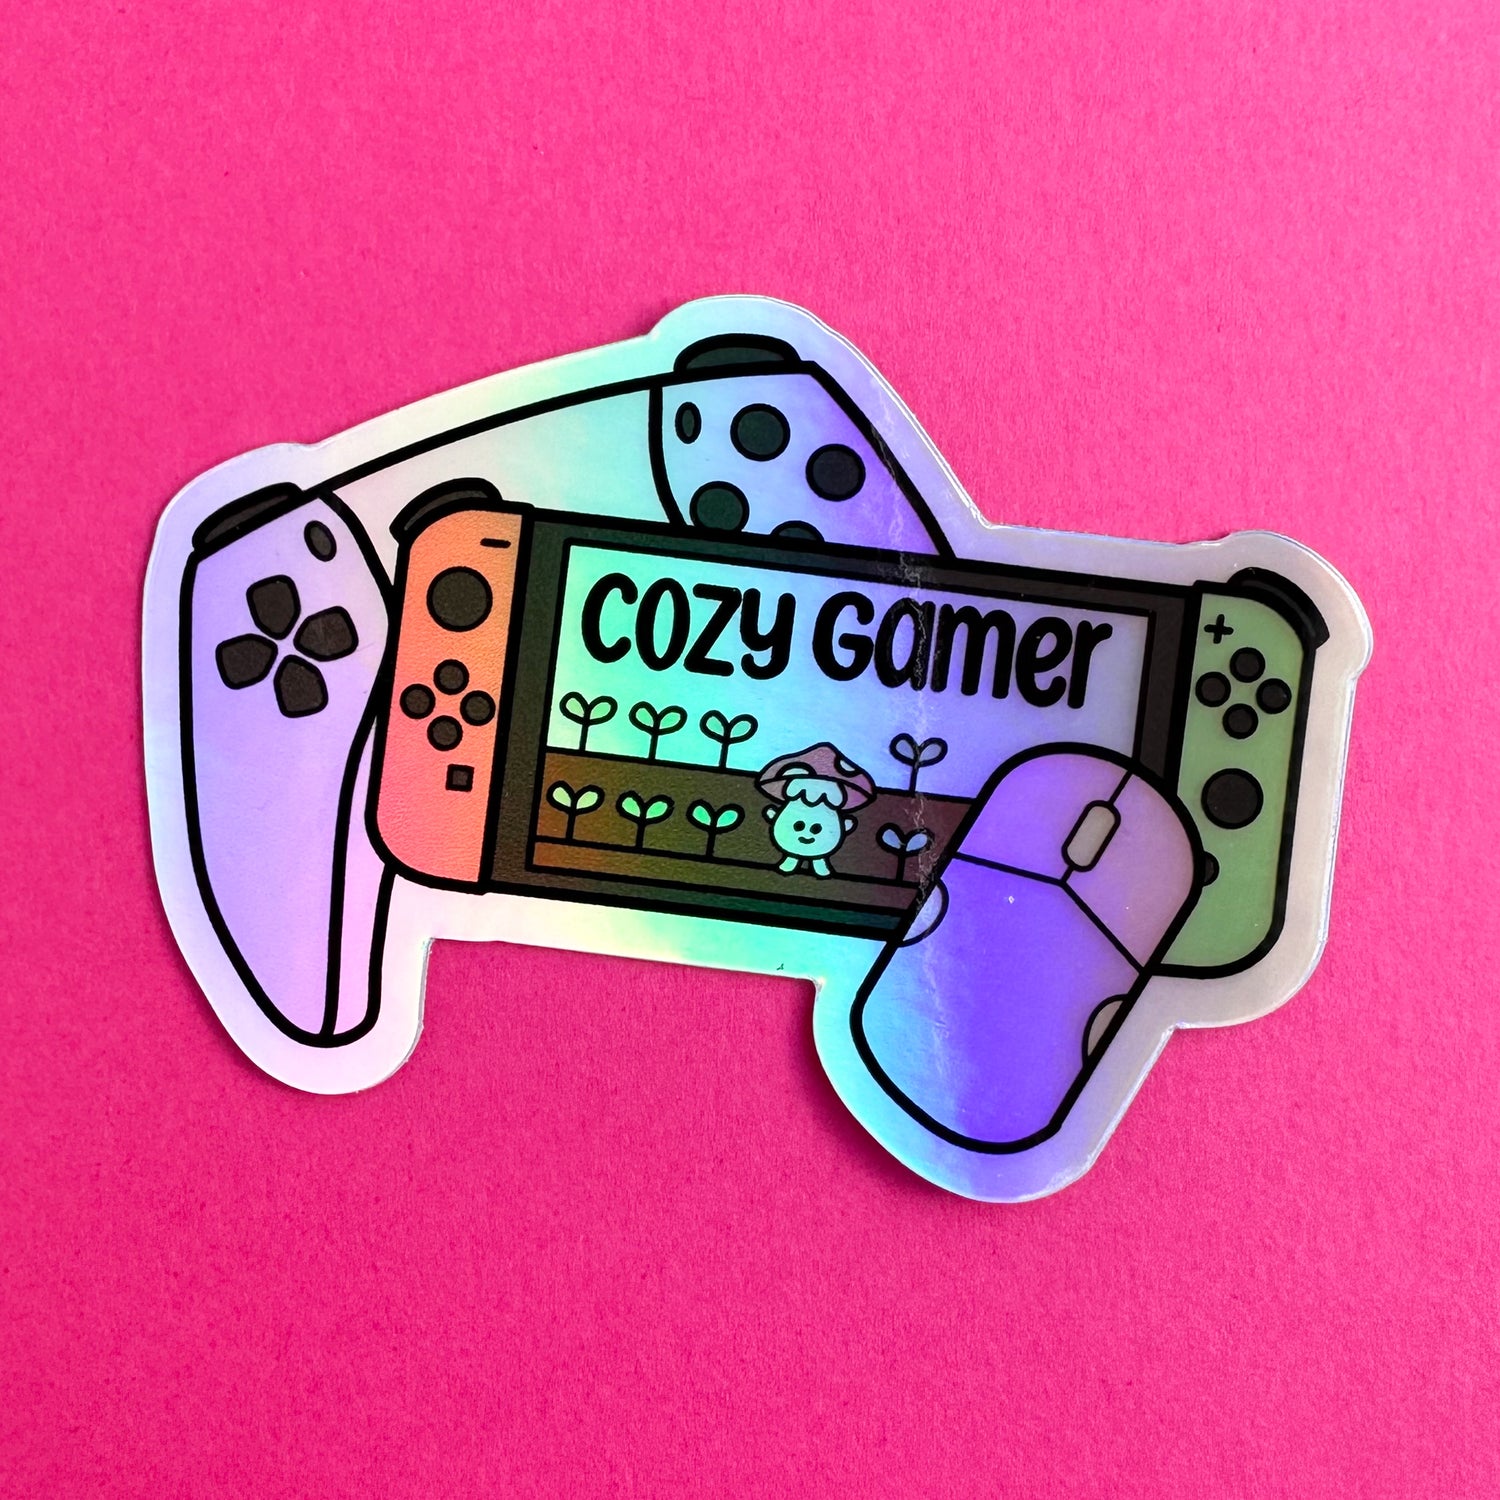 A Nintendo switch sticker that reads "cozy gamer" on a hot pink background.